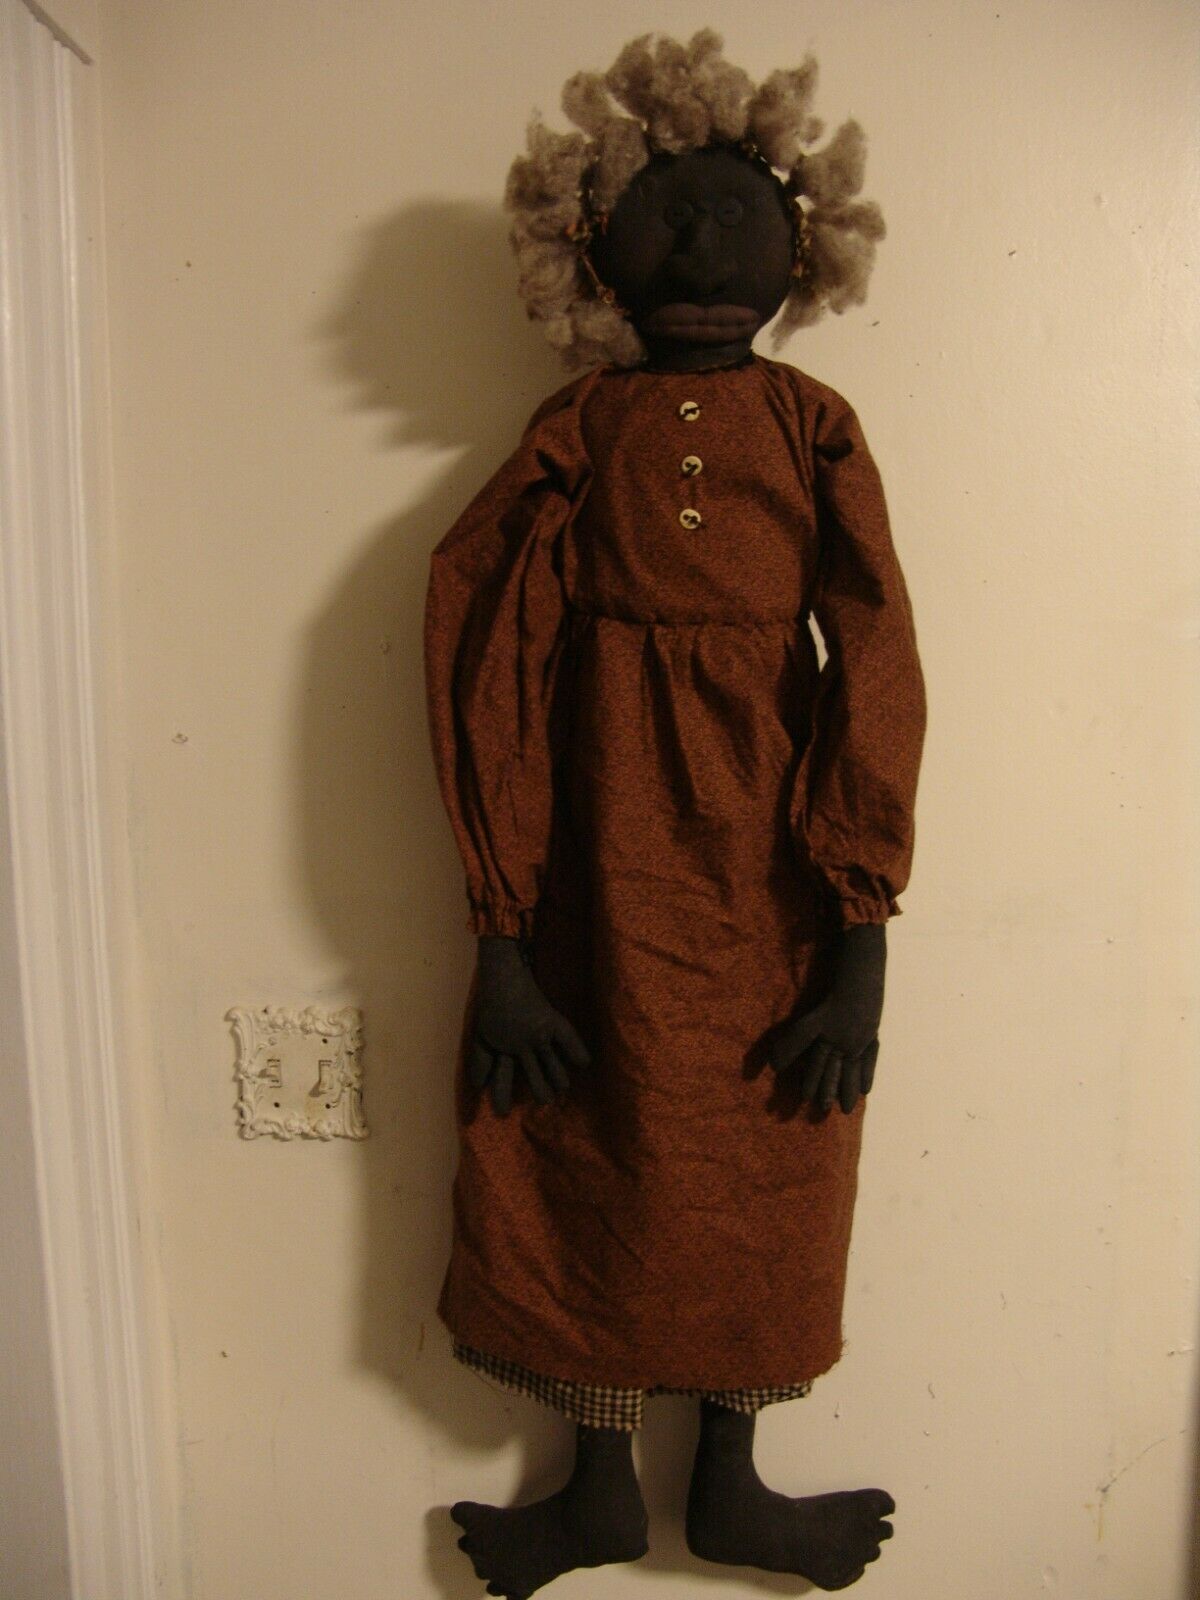 Child Sized Shadow Doll From New Orleans - High Familiar Quality - Active Usage